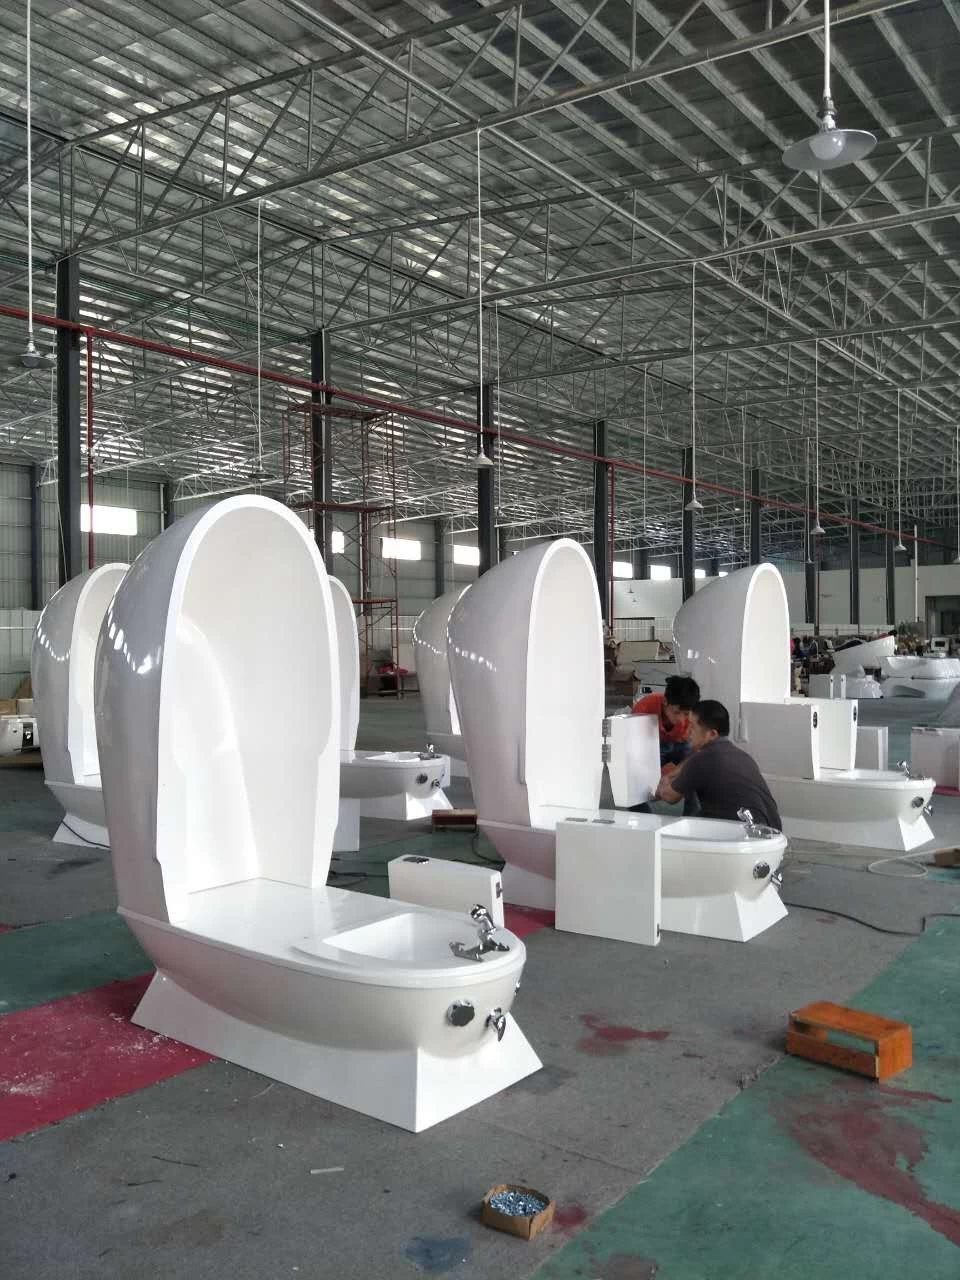 hot sale pedicure station manicure station suppliers and manufacturer of salon and spa furniture